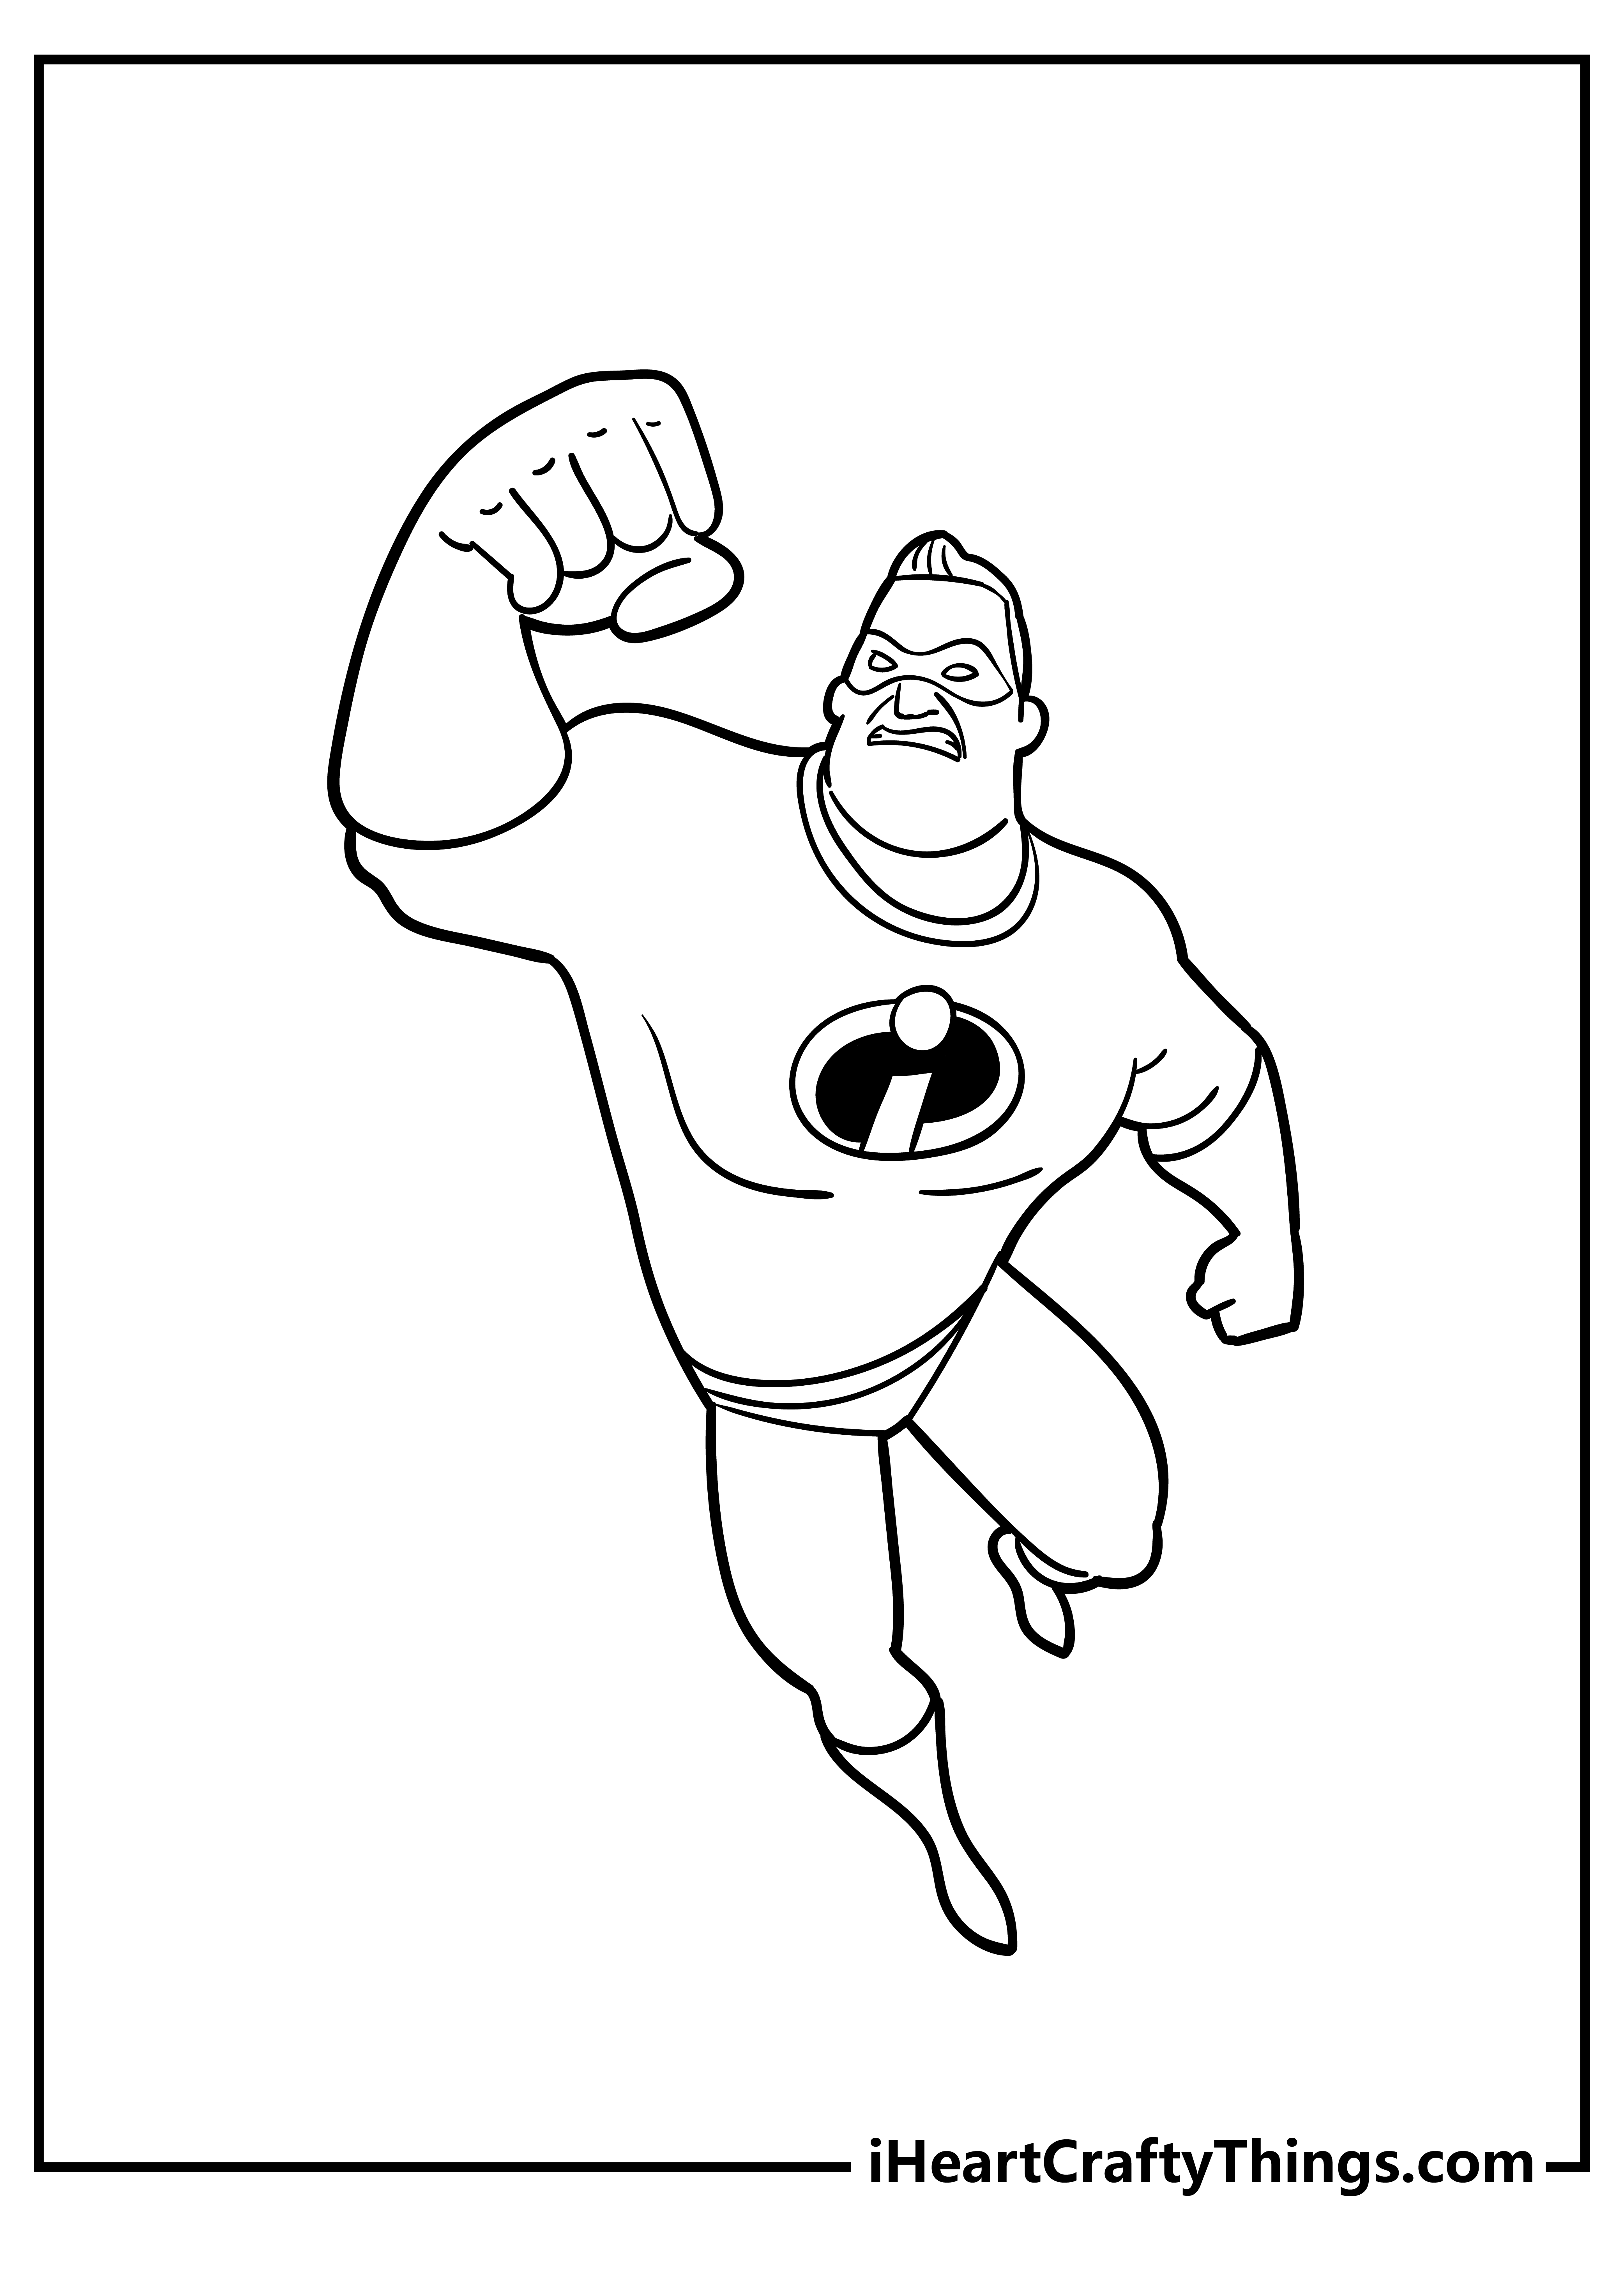 Superheroes Coloring Book for adults free download